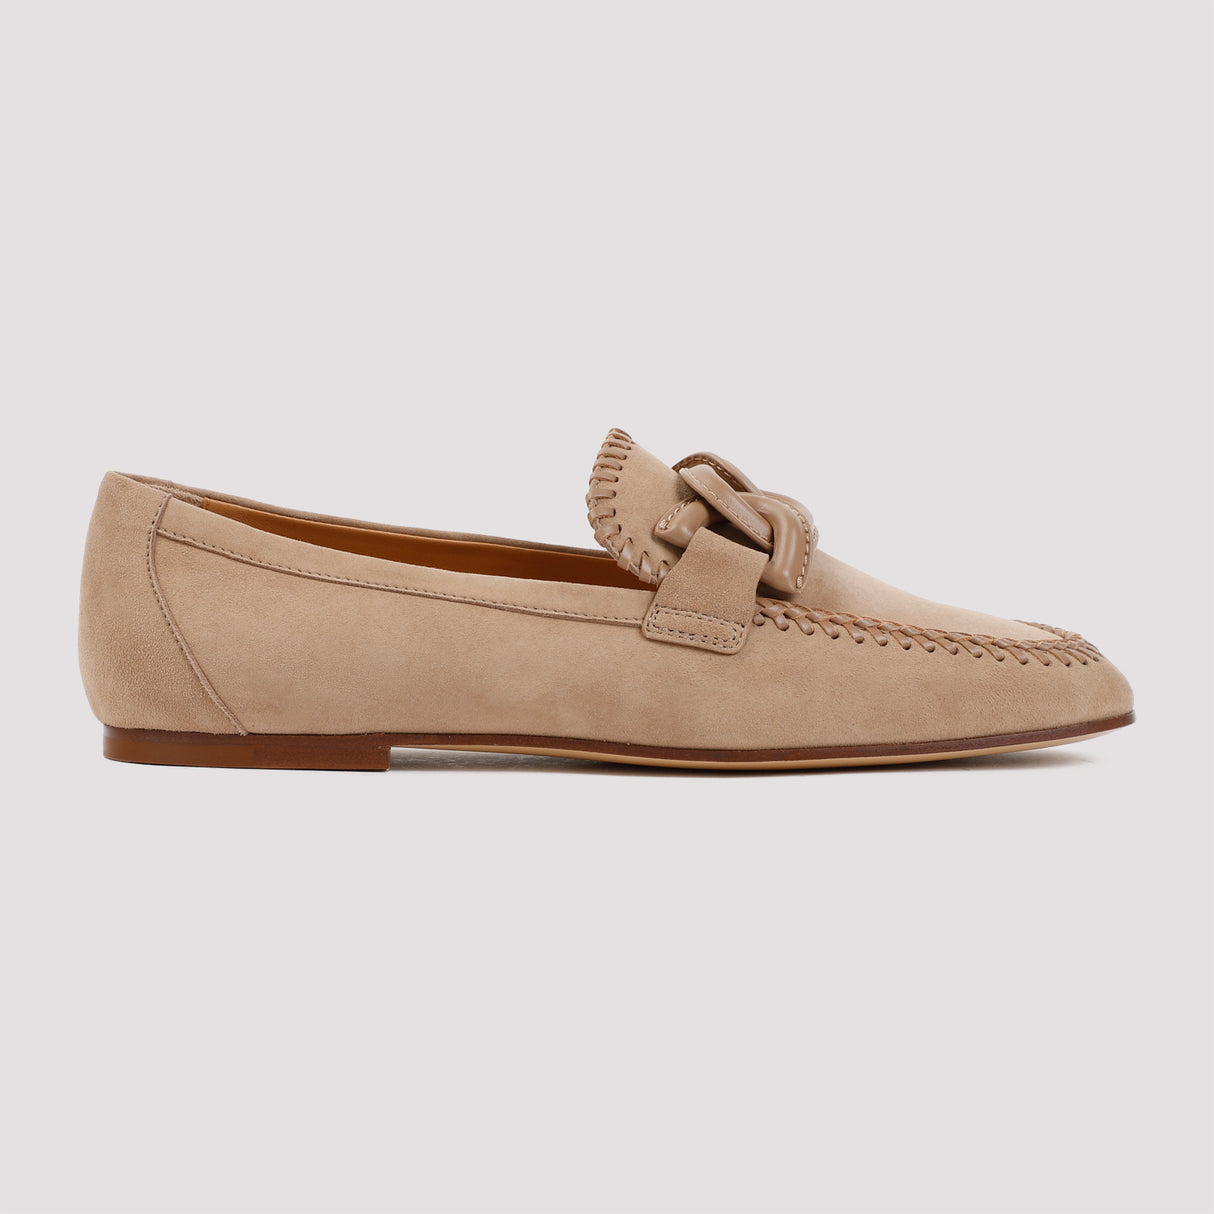 TOD'S Women's Nude & Neutrals Suede Leather Loafers